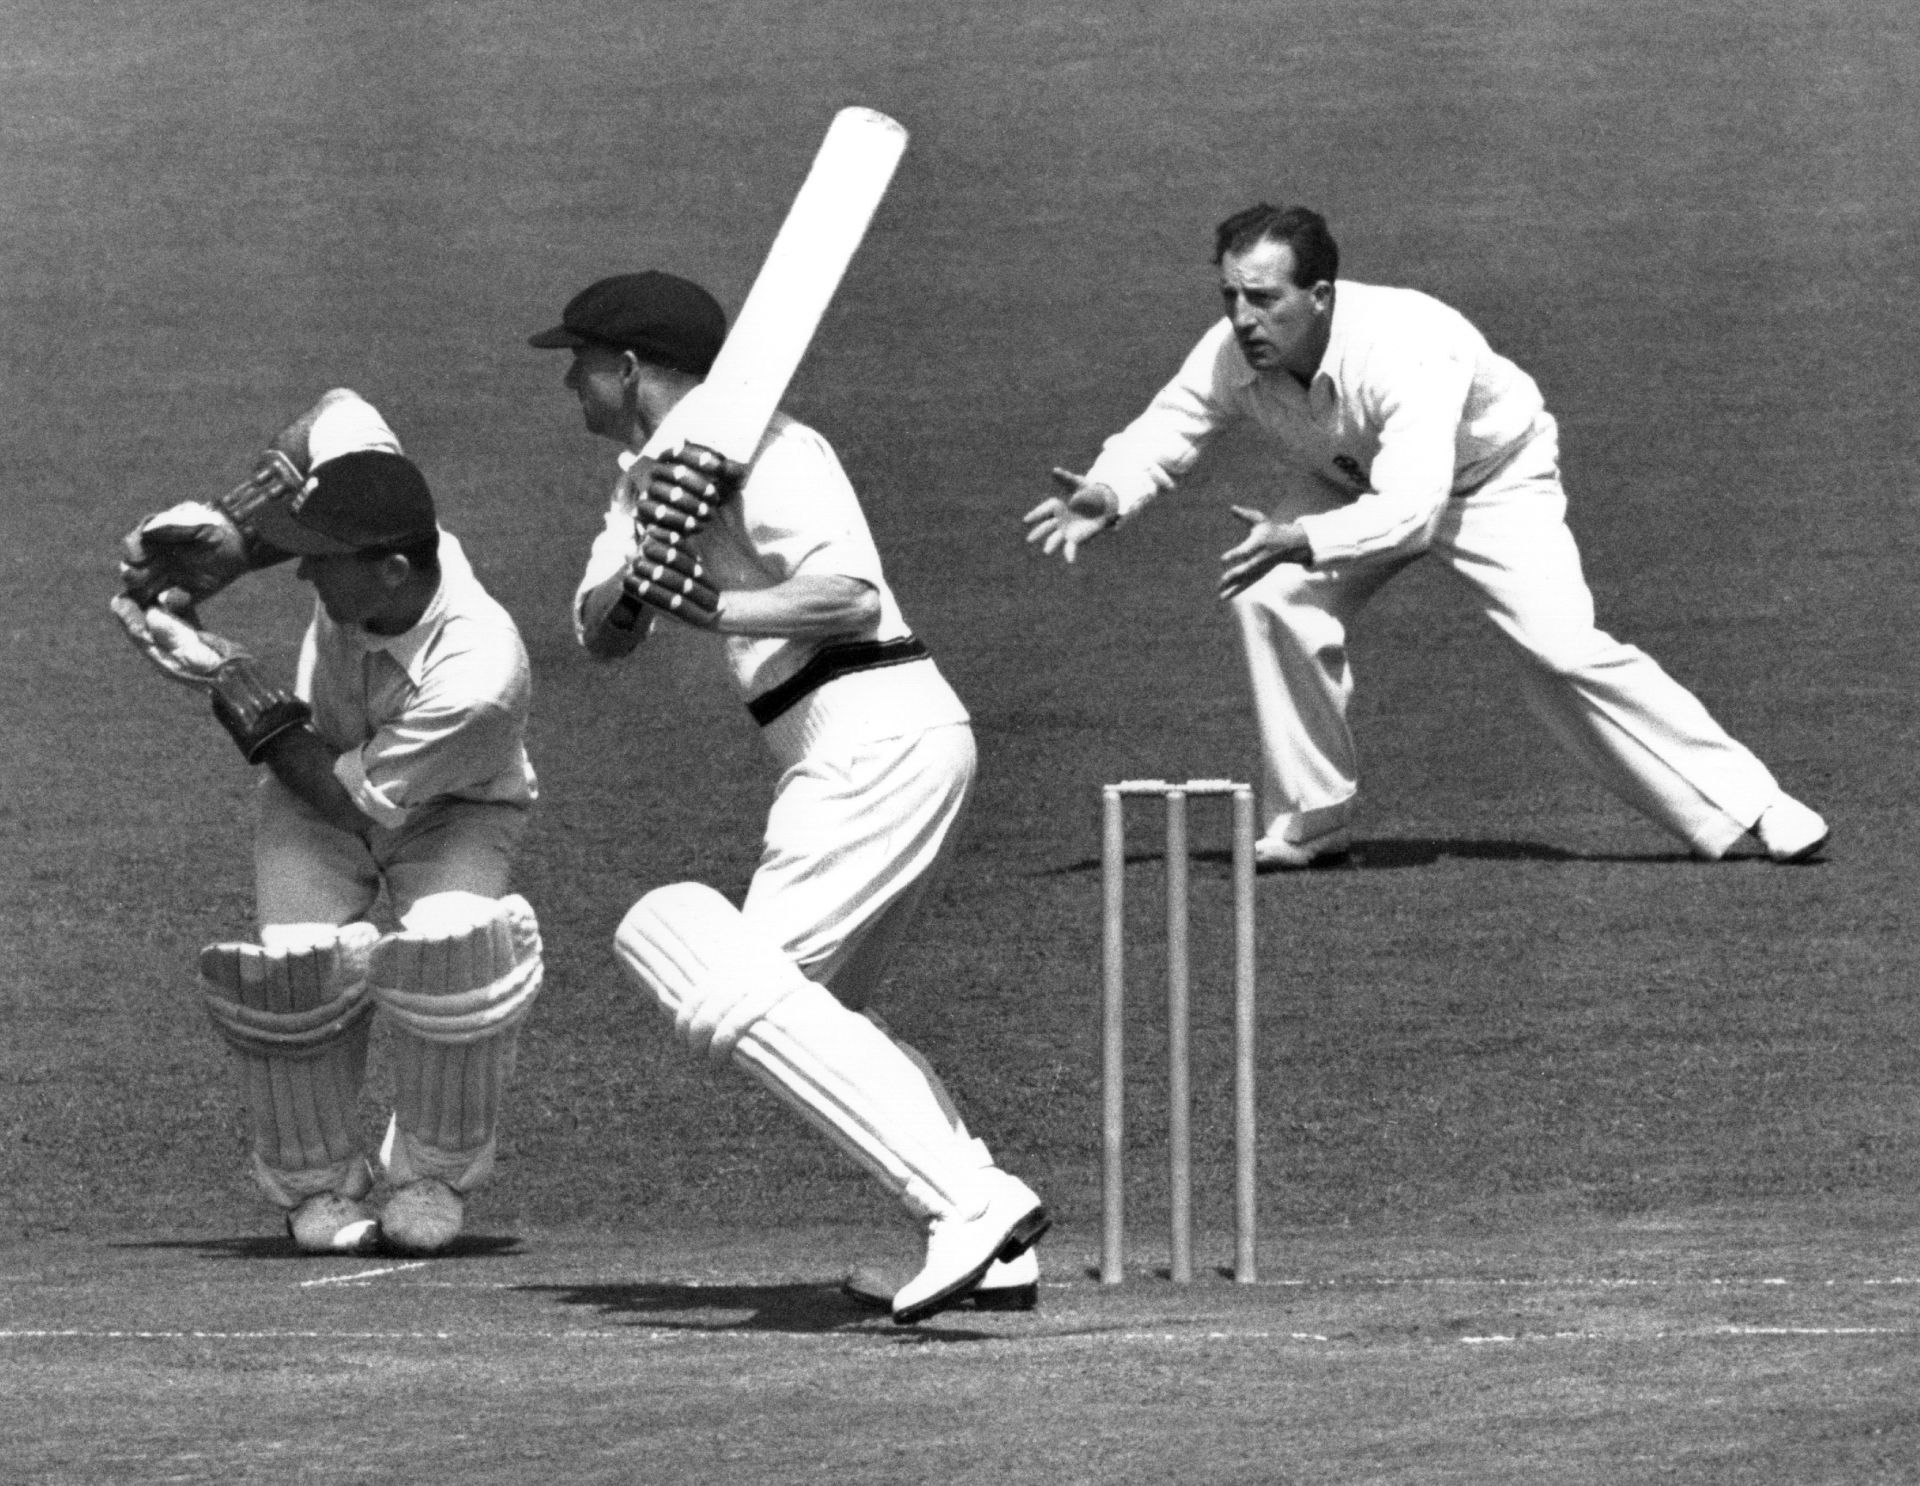 A typically rasping square-cut by Don Bradman at Trent Bridge in 1948